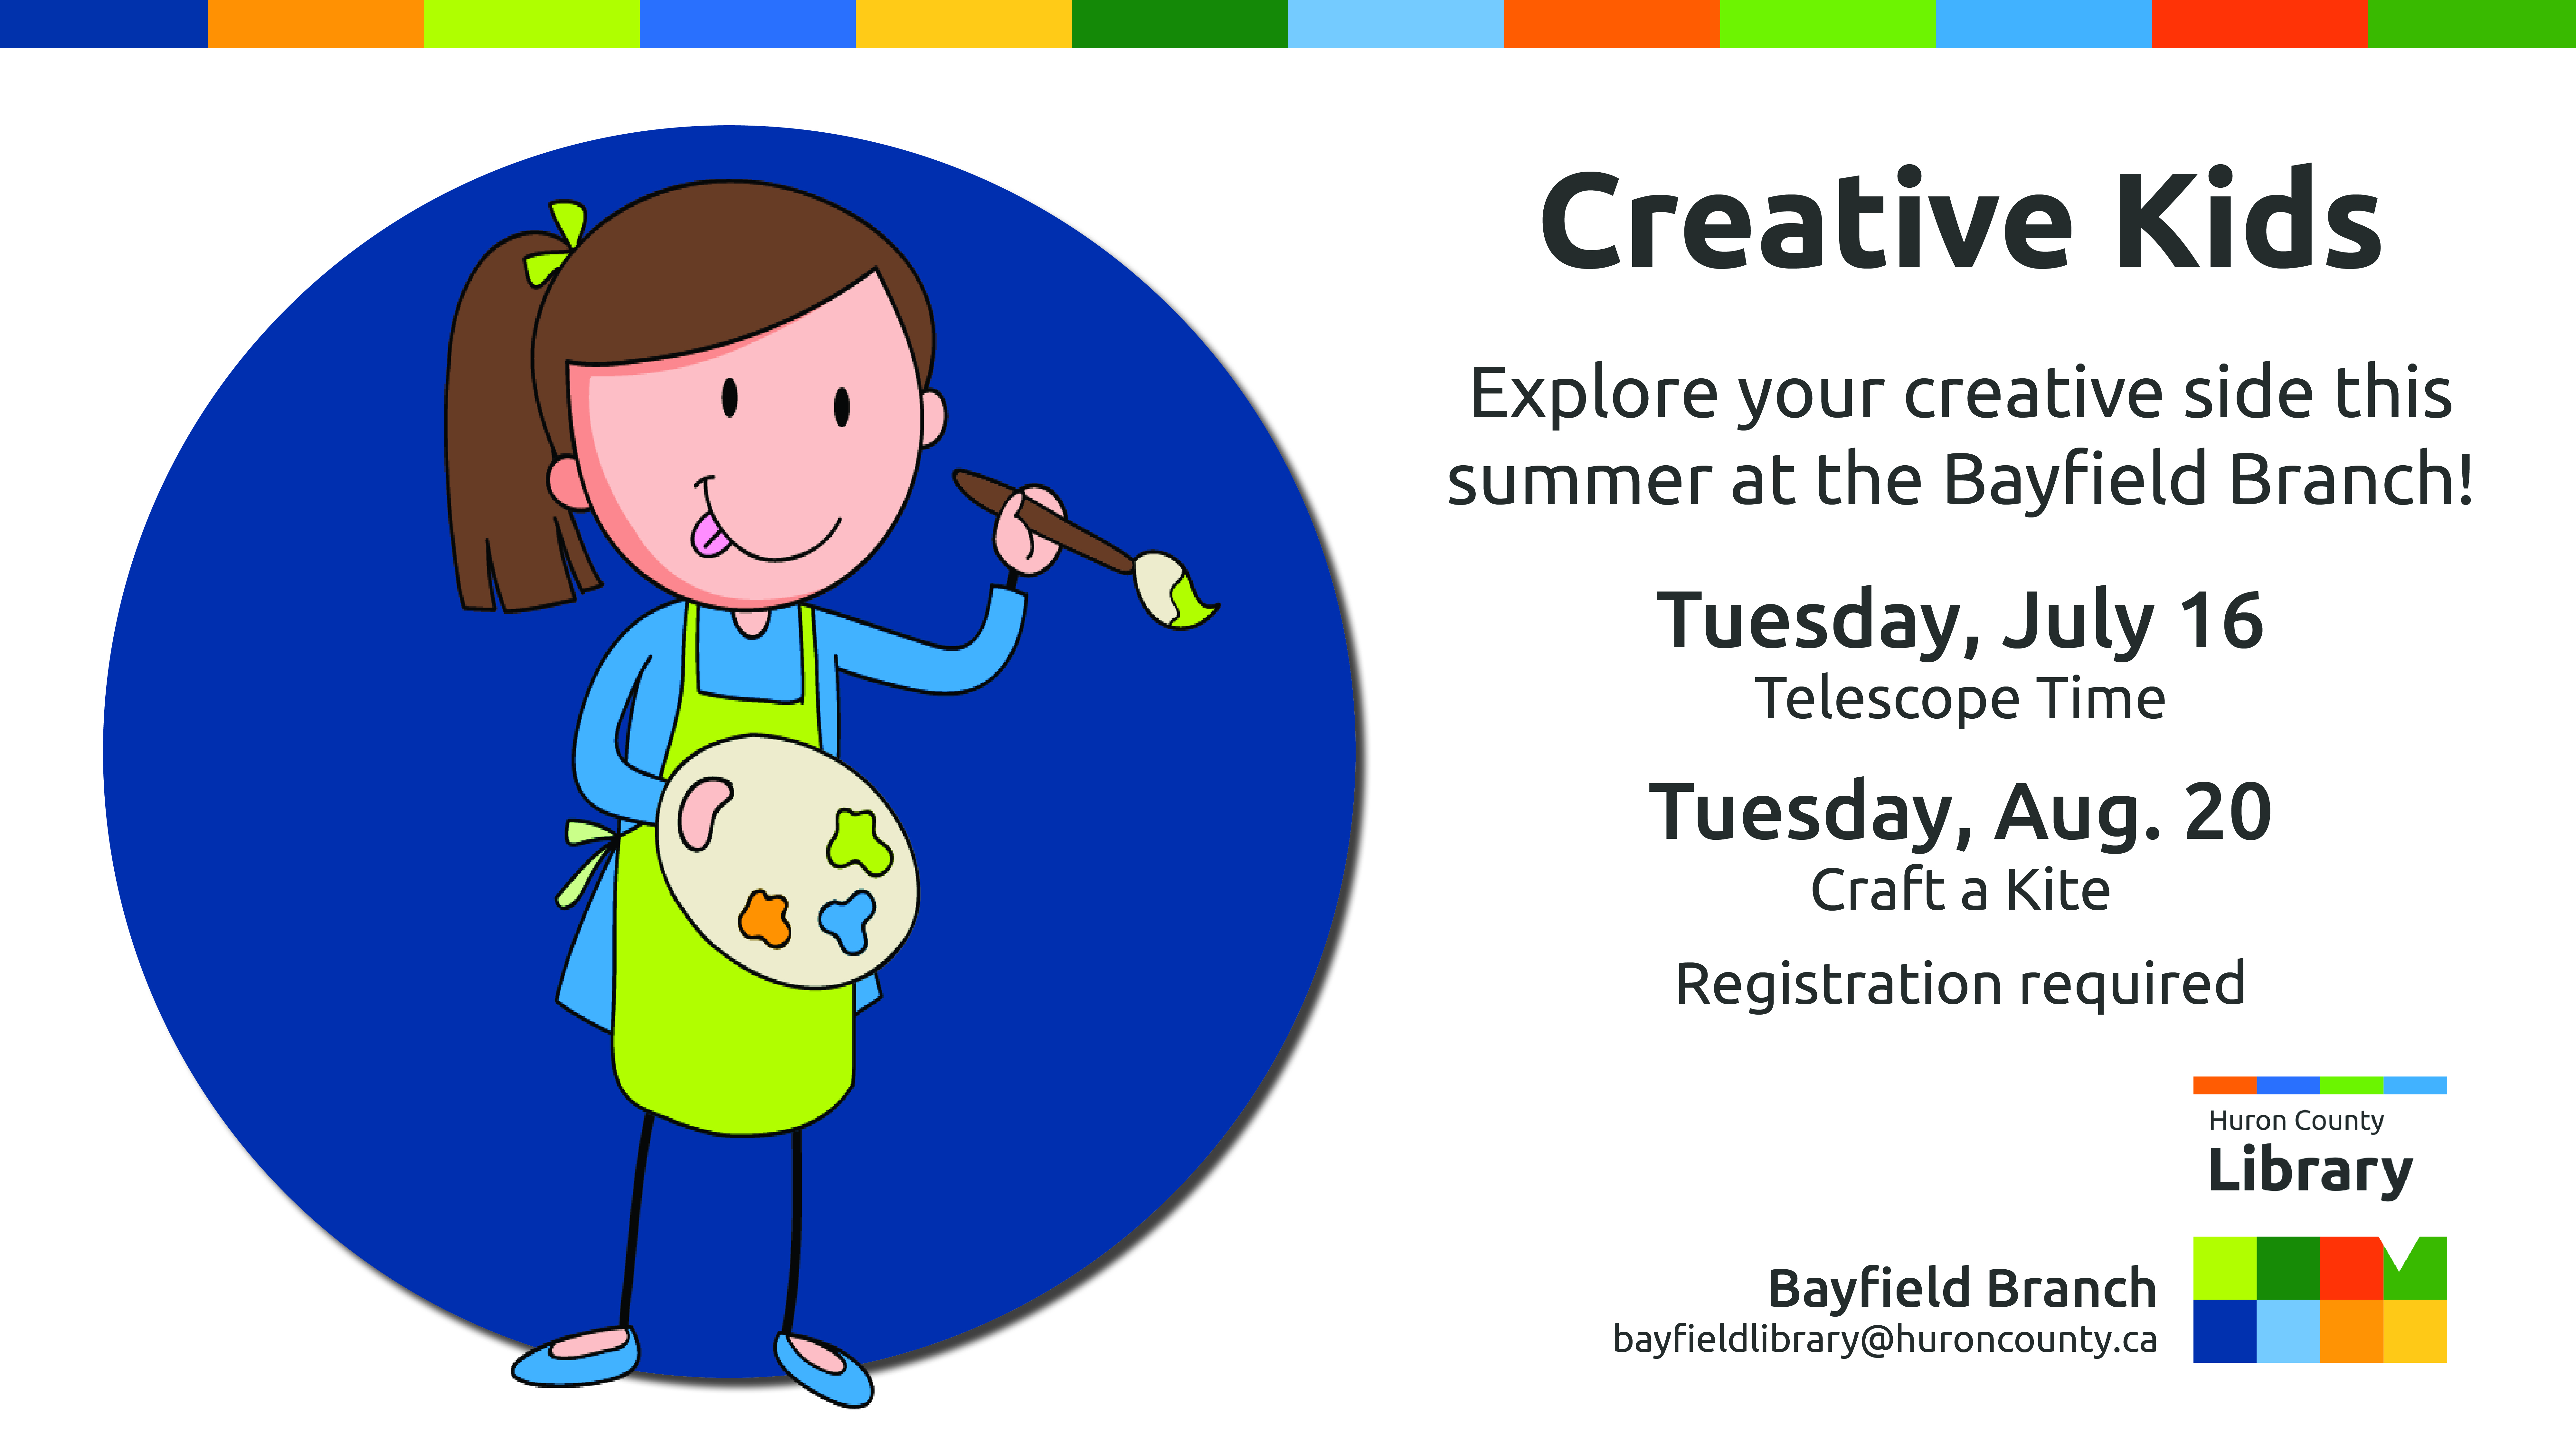 Illustration of a girl with a paint brush and paint with text promoting Creative Kids at Bayfield